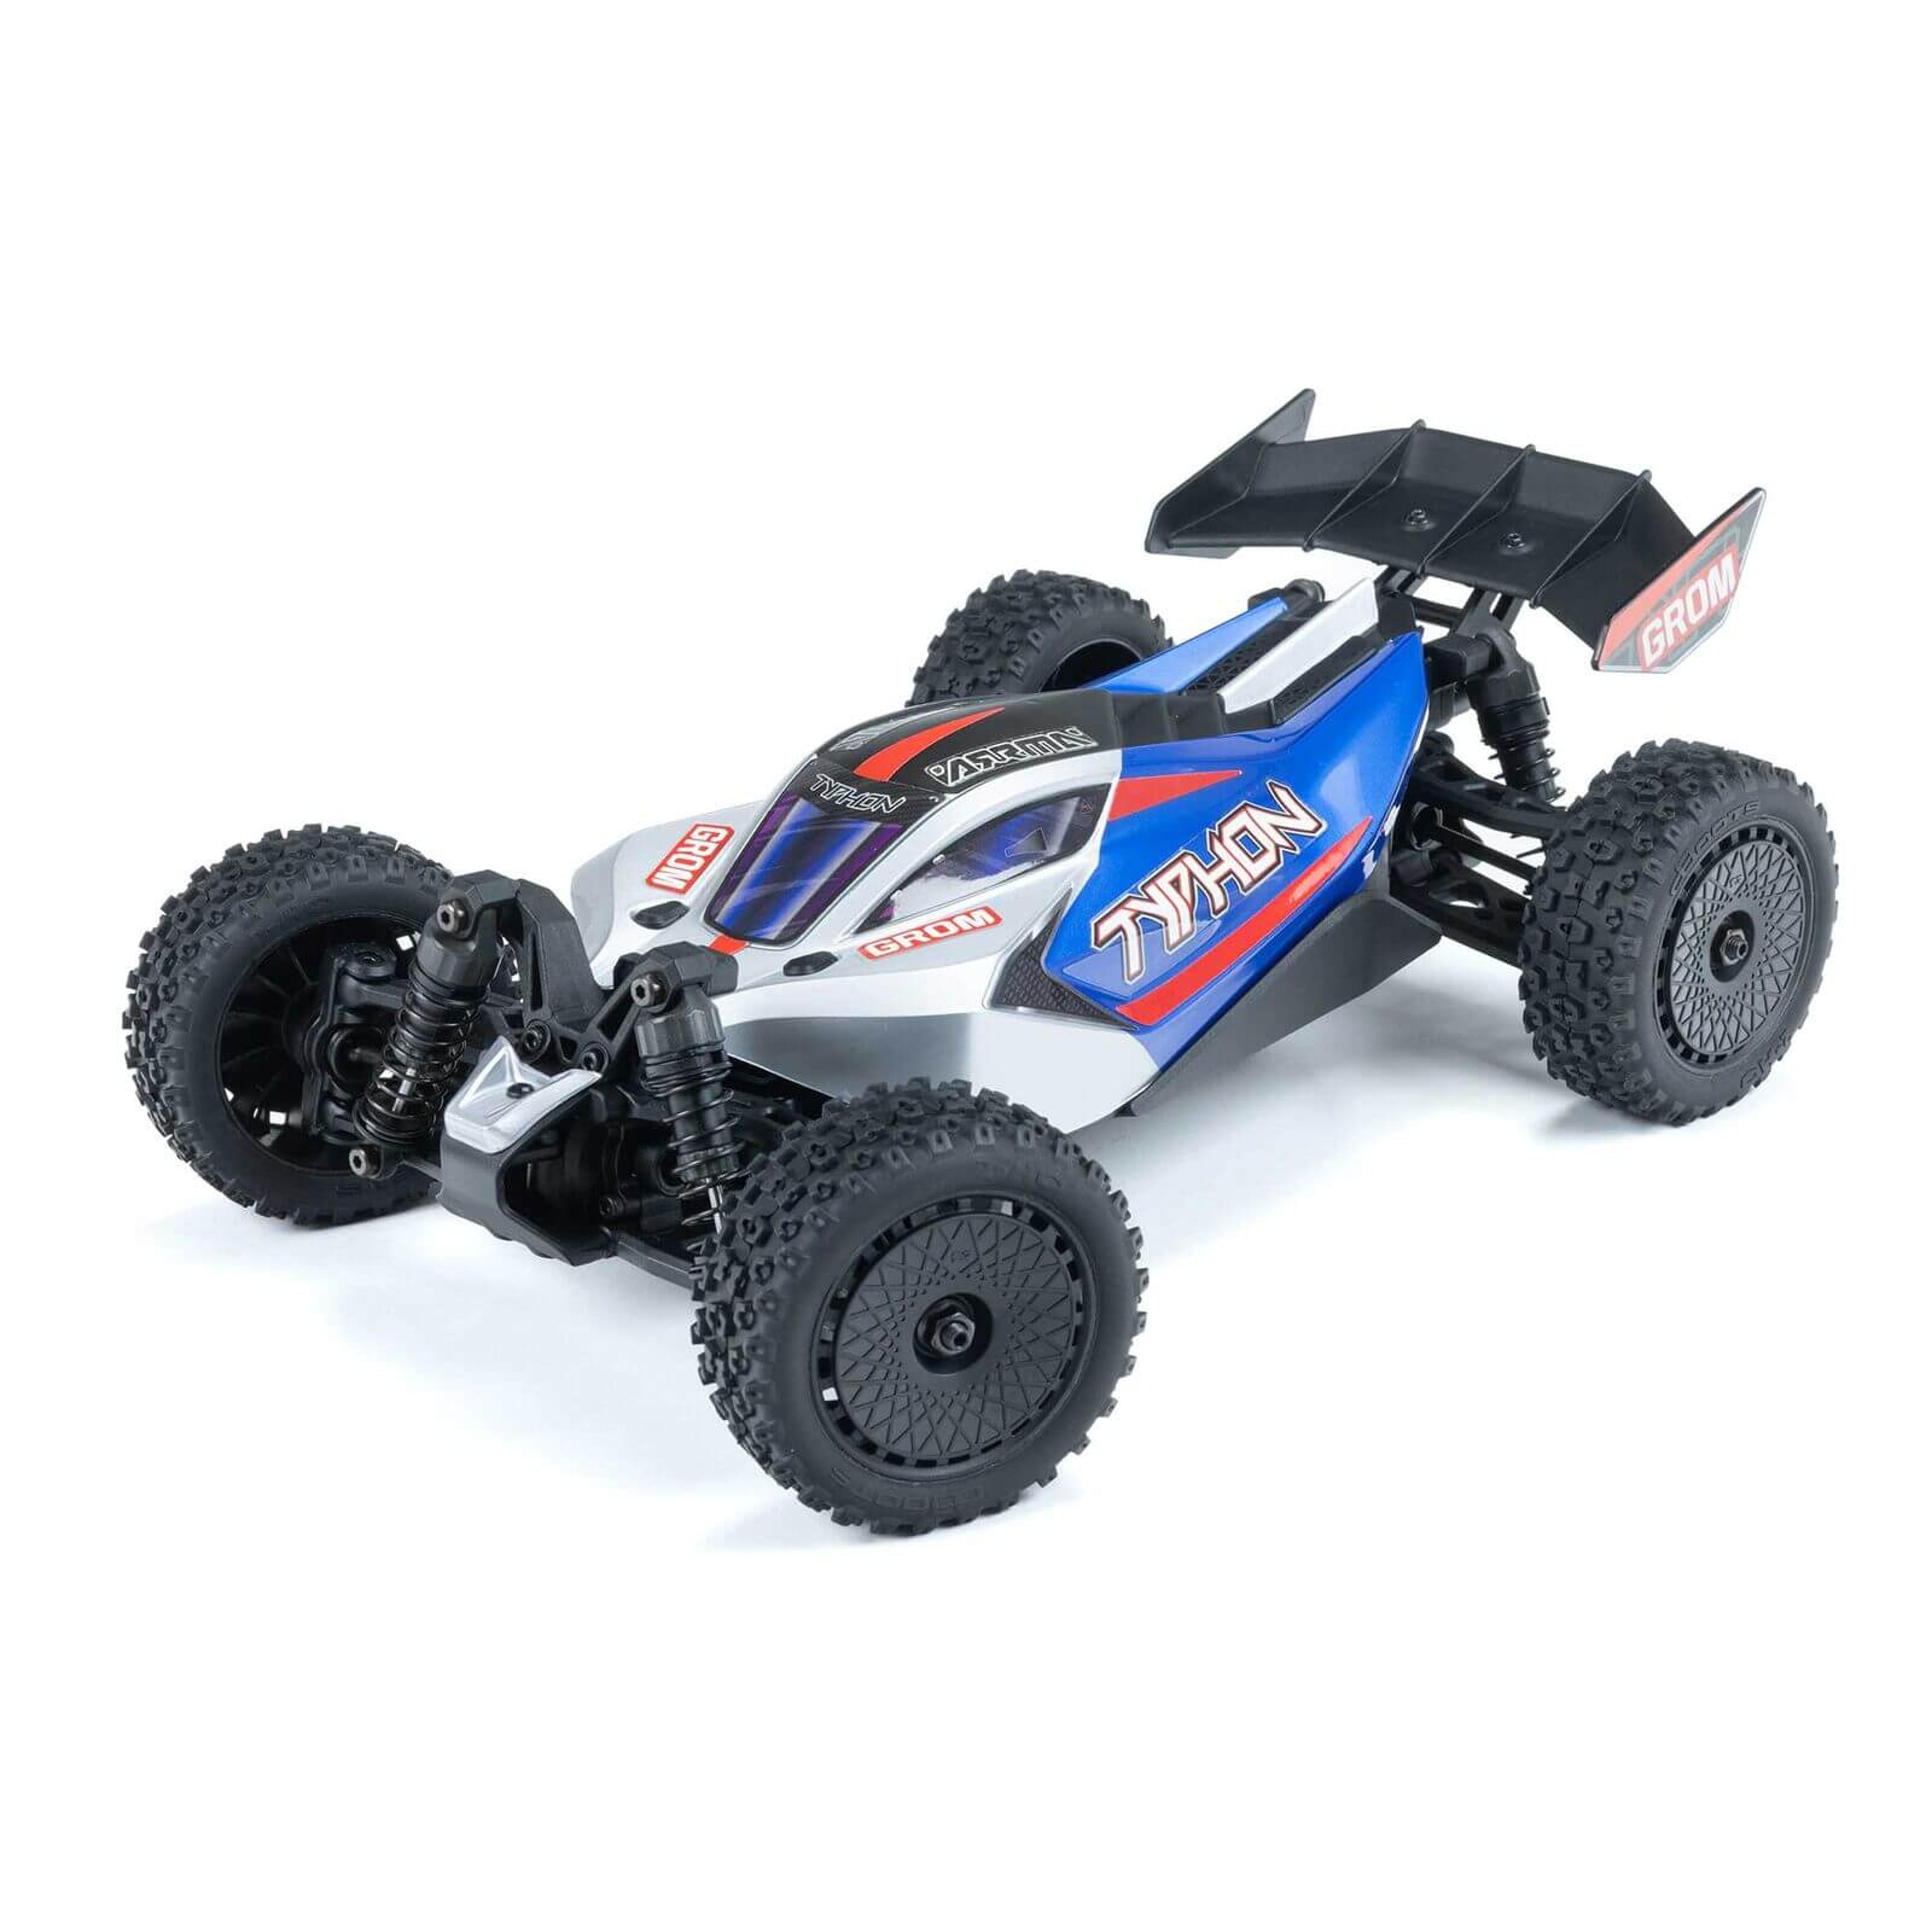 Typhon Grom Mega 380 Brushed 4x4 Small Scale Buggy RTR R/C (Blue/Silver)